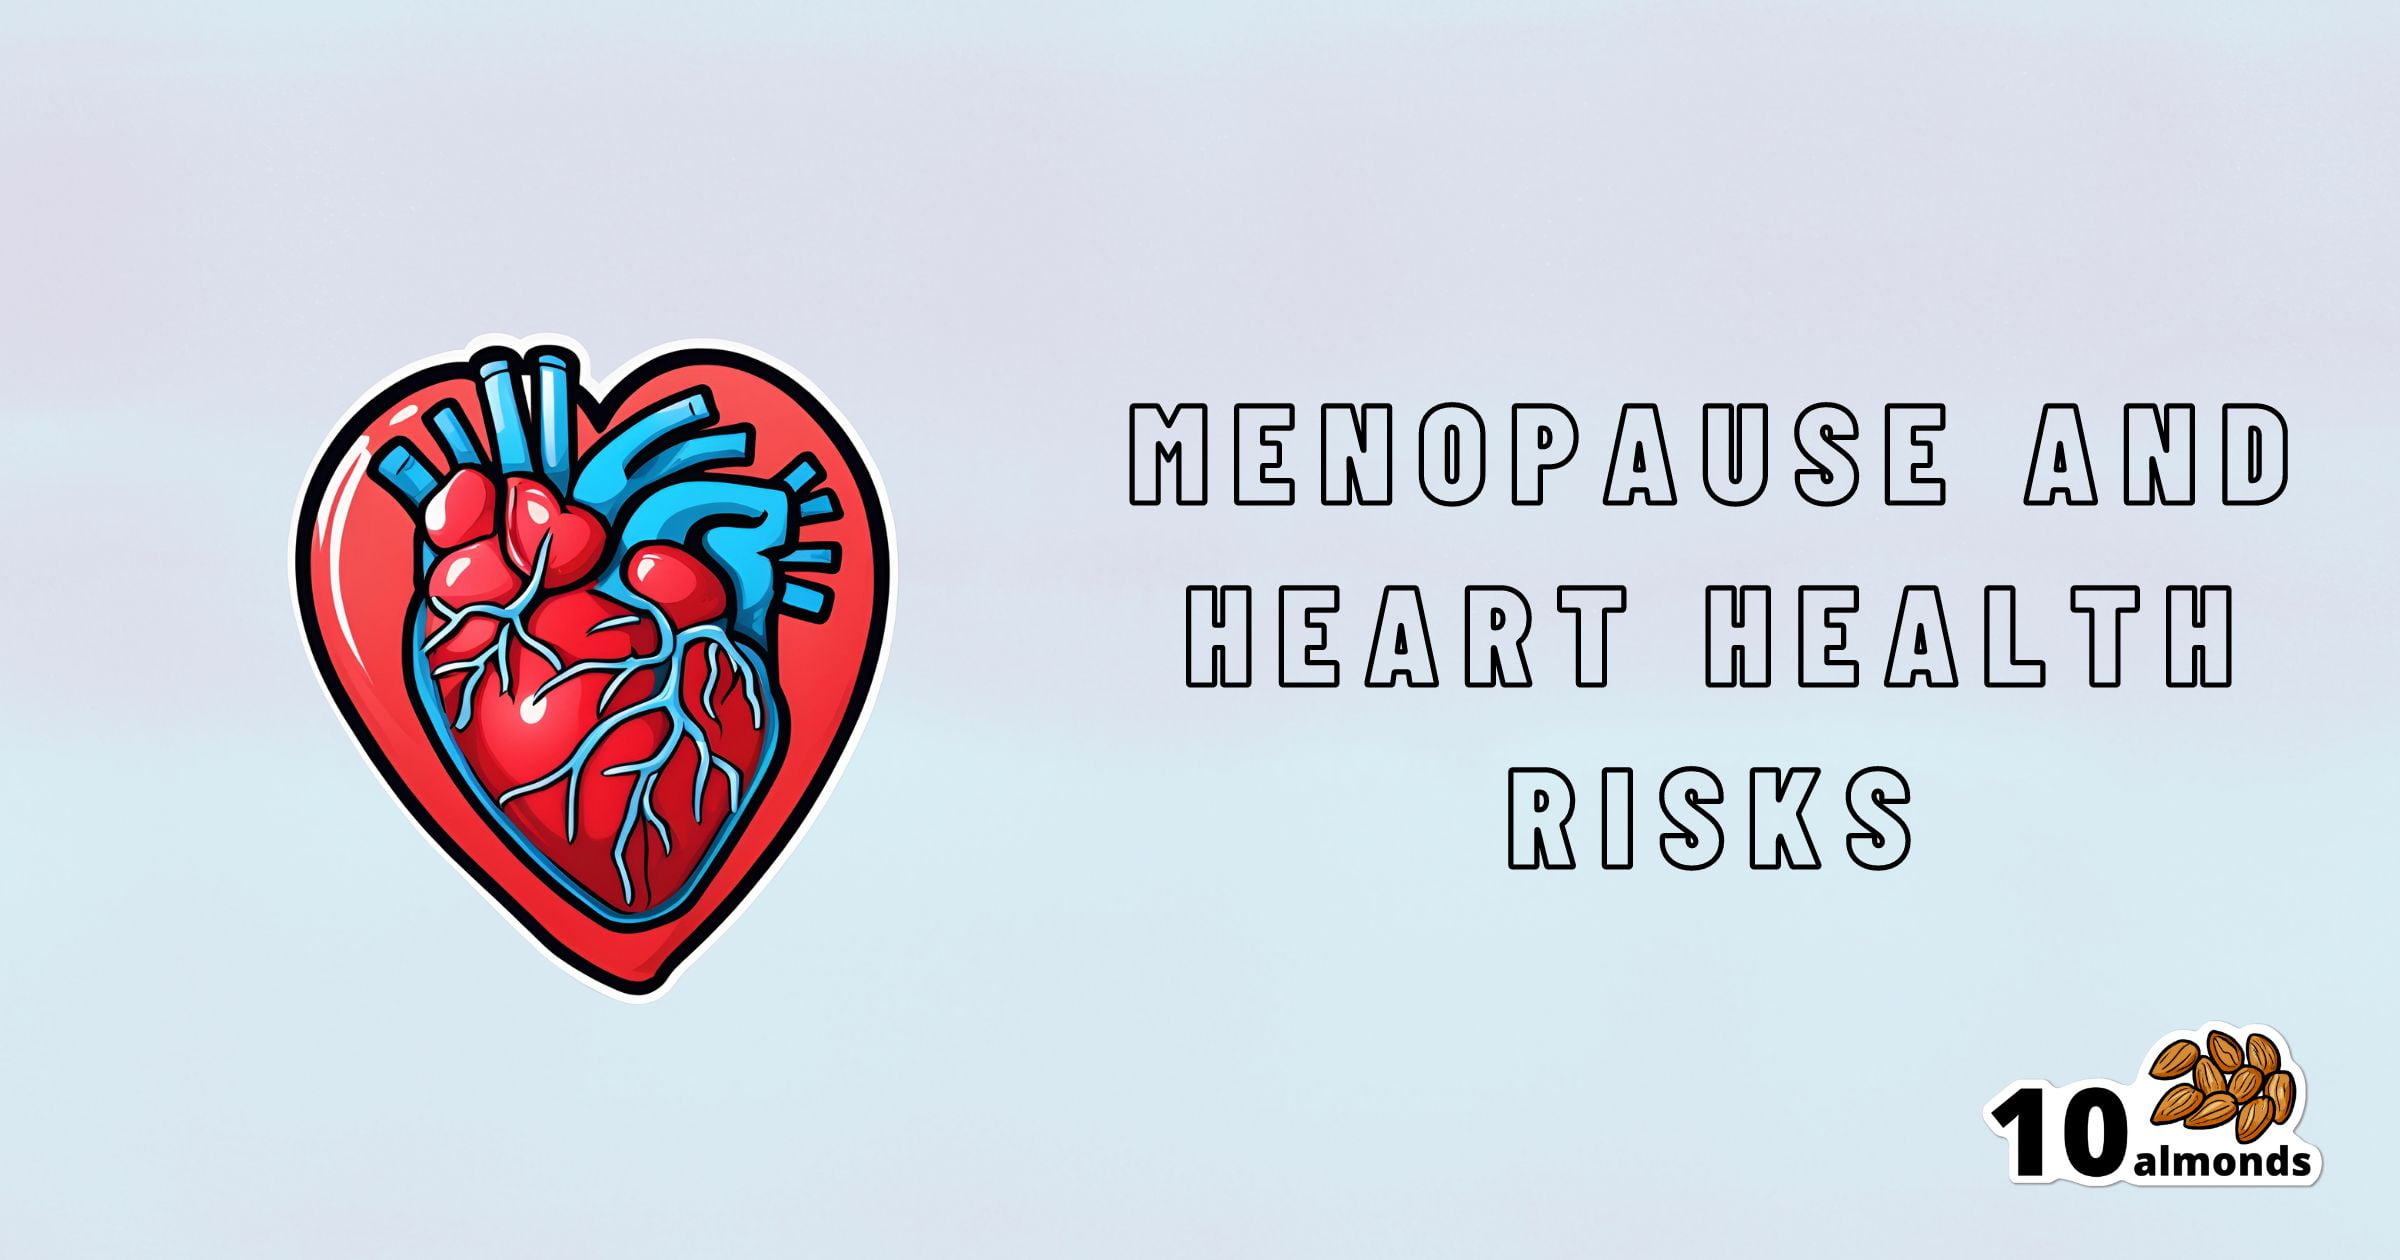 Illustration of a heart inside a red heart-shaped outline on a light blue background. The right text reads "Menopause and Heart Risks" in black uppercase letters, highlighting the connection between menopause and increased cholesterol. The bottom right corner features the "10 almonds" logo with an image of almonds.